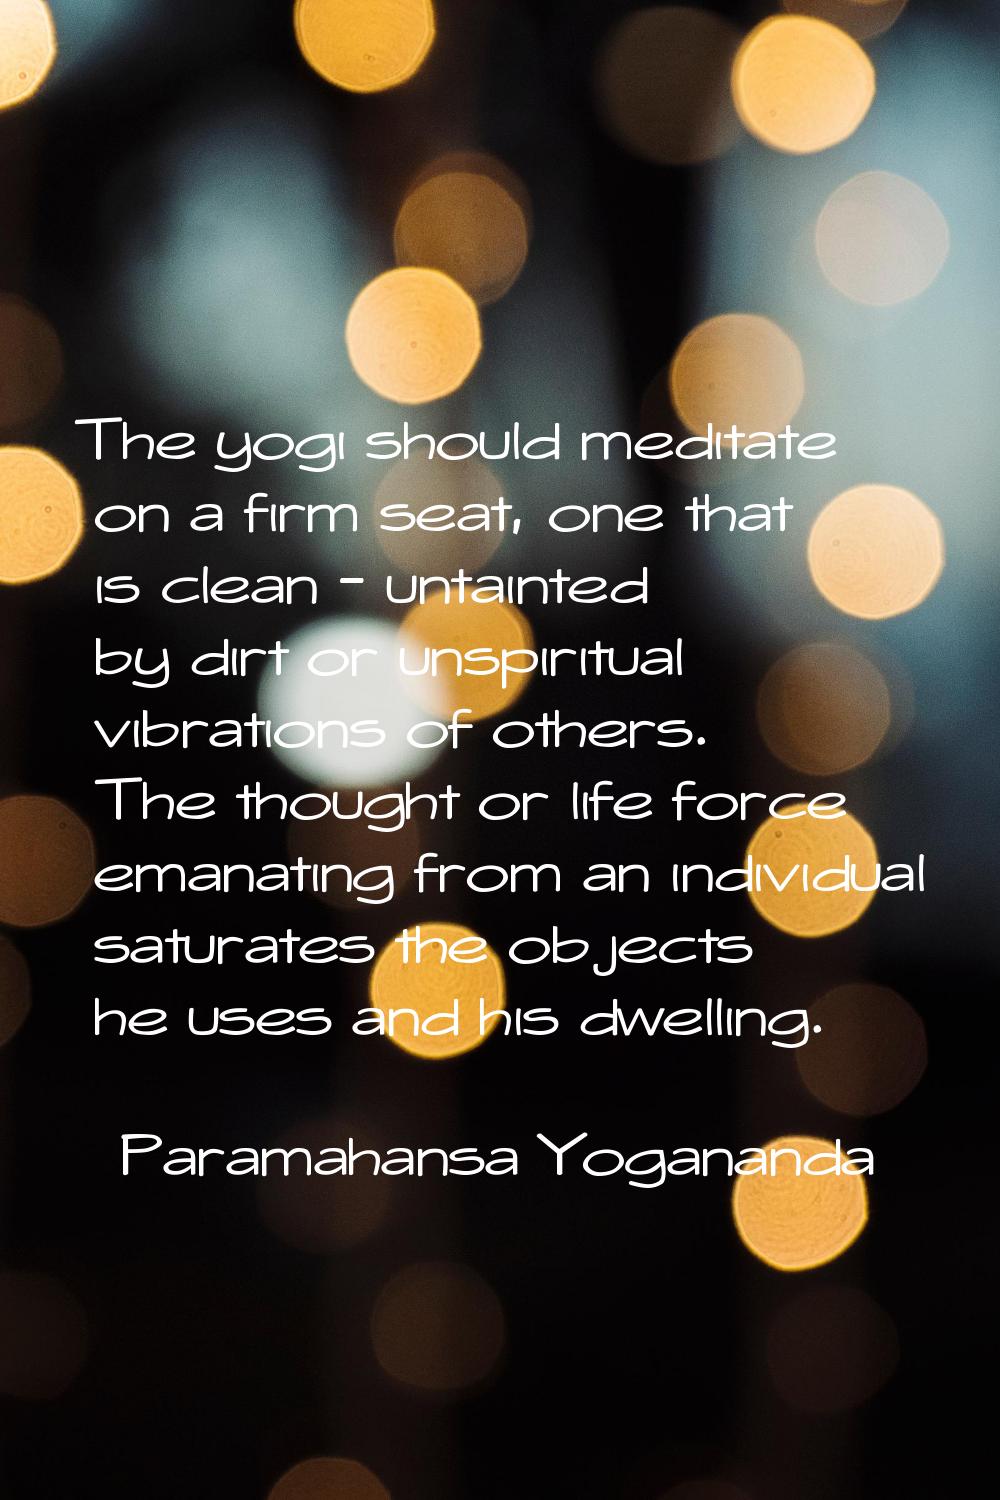 The yogi should meditate on a firm seat, one that is clean - untainted by dirt or unspiritual vibra